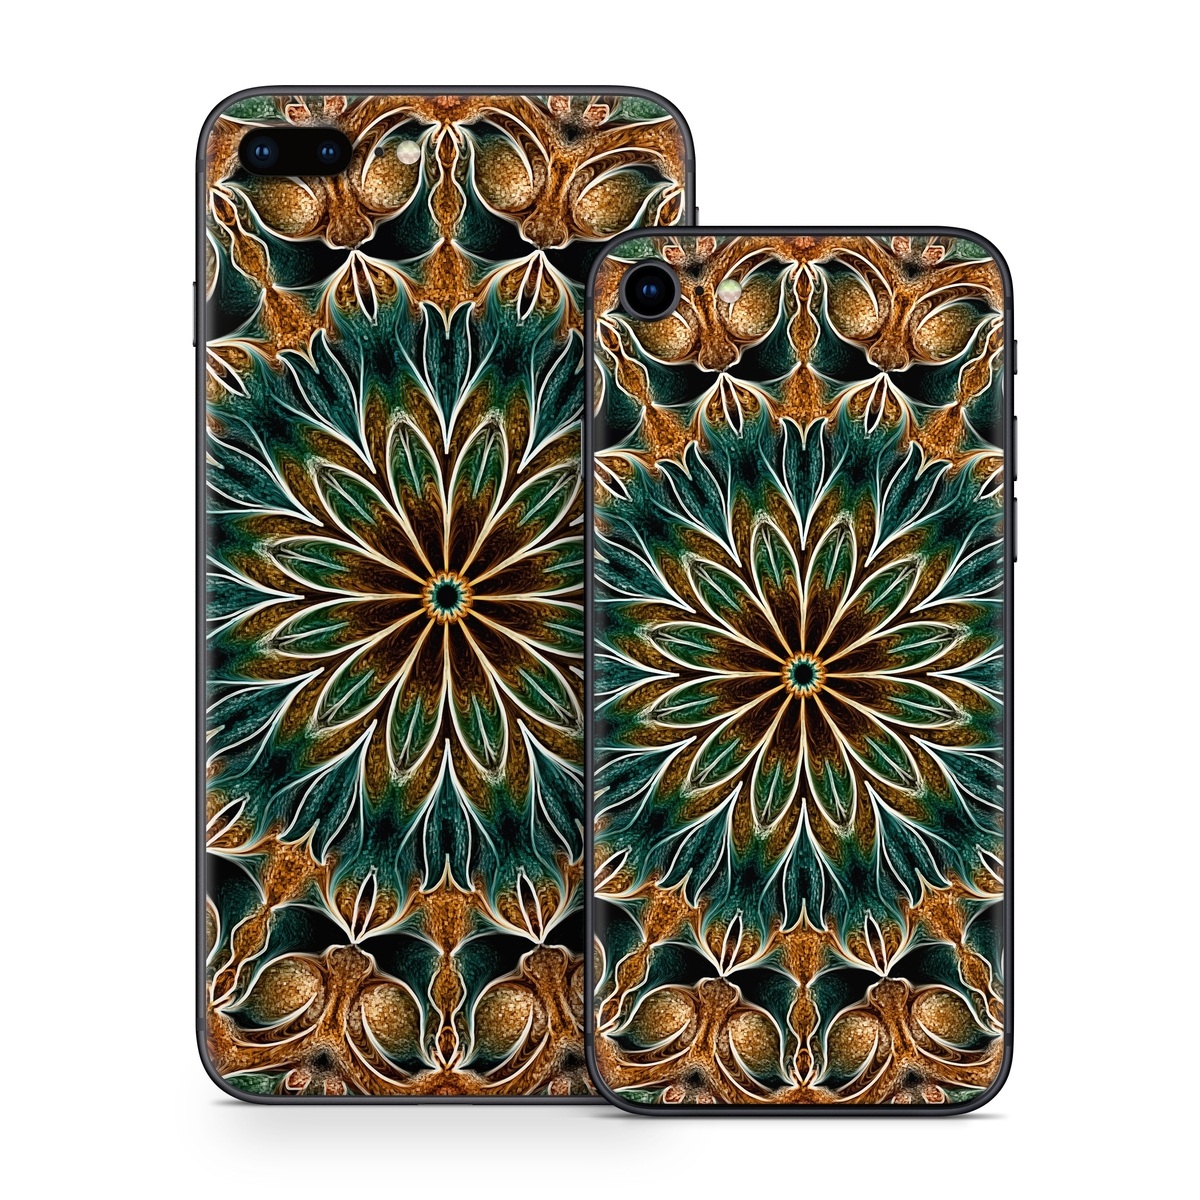 iPhone 8 Series Skin design of Pattern, Symmetry, Textile, Art, Psychedelic art, Tapestry, Design, Visual arts, Kaleidoscope, Motif, with green, orange, yellow, brown, red colors